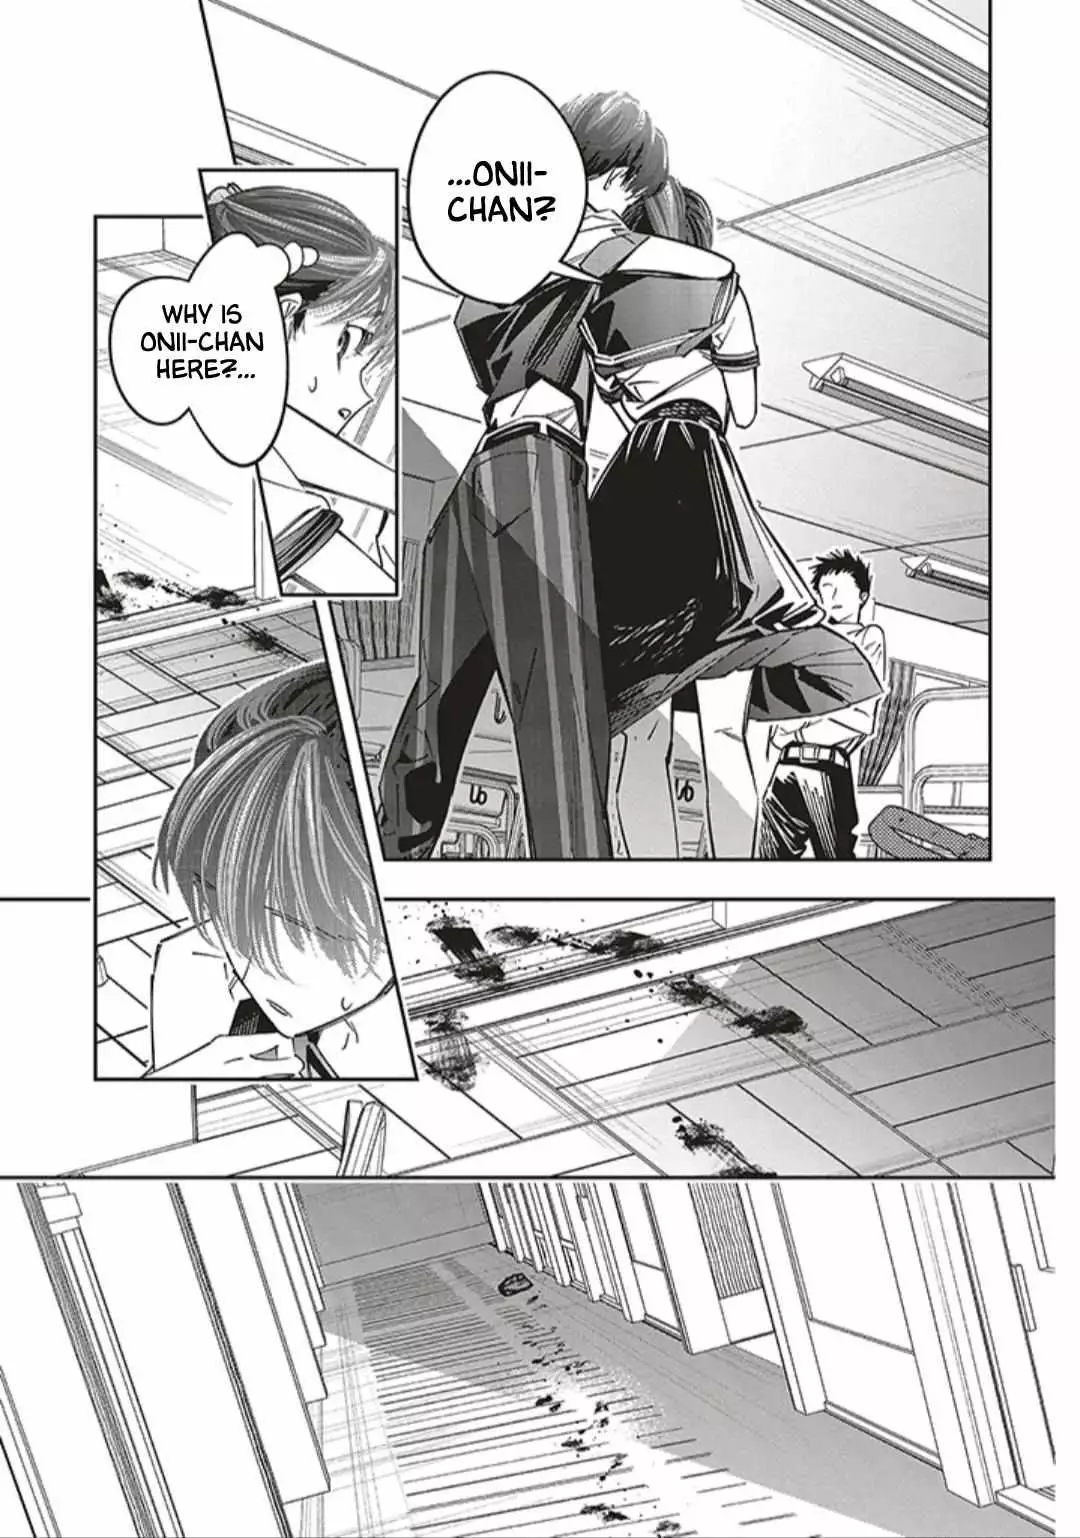 I Reincarnated As The Little Sister Of A Death Game Manga's Murder Mastermind And Failed - 18 page 3-19f40453